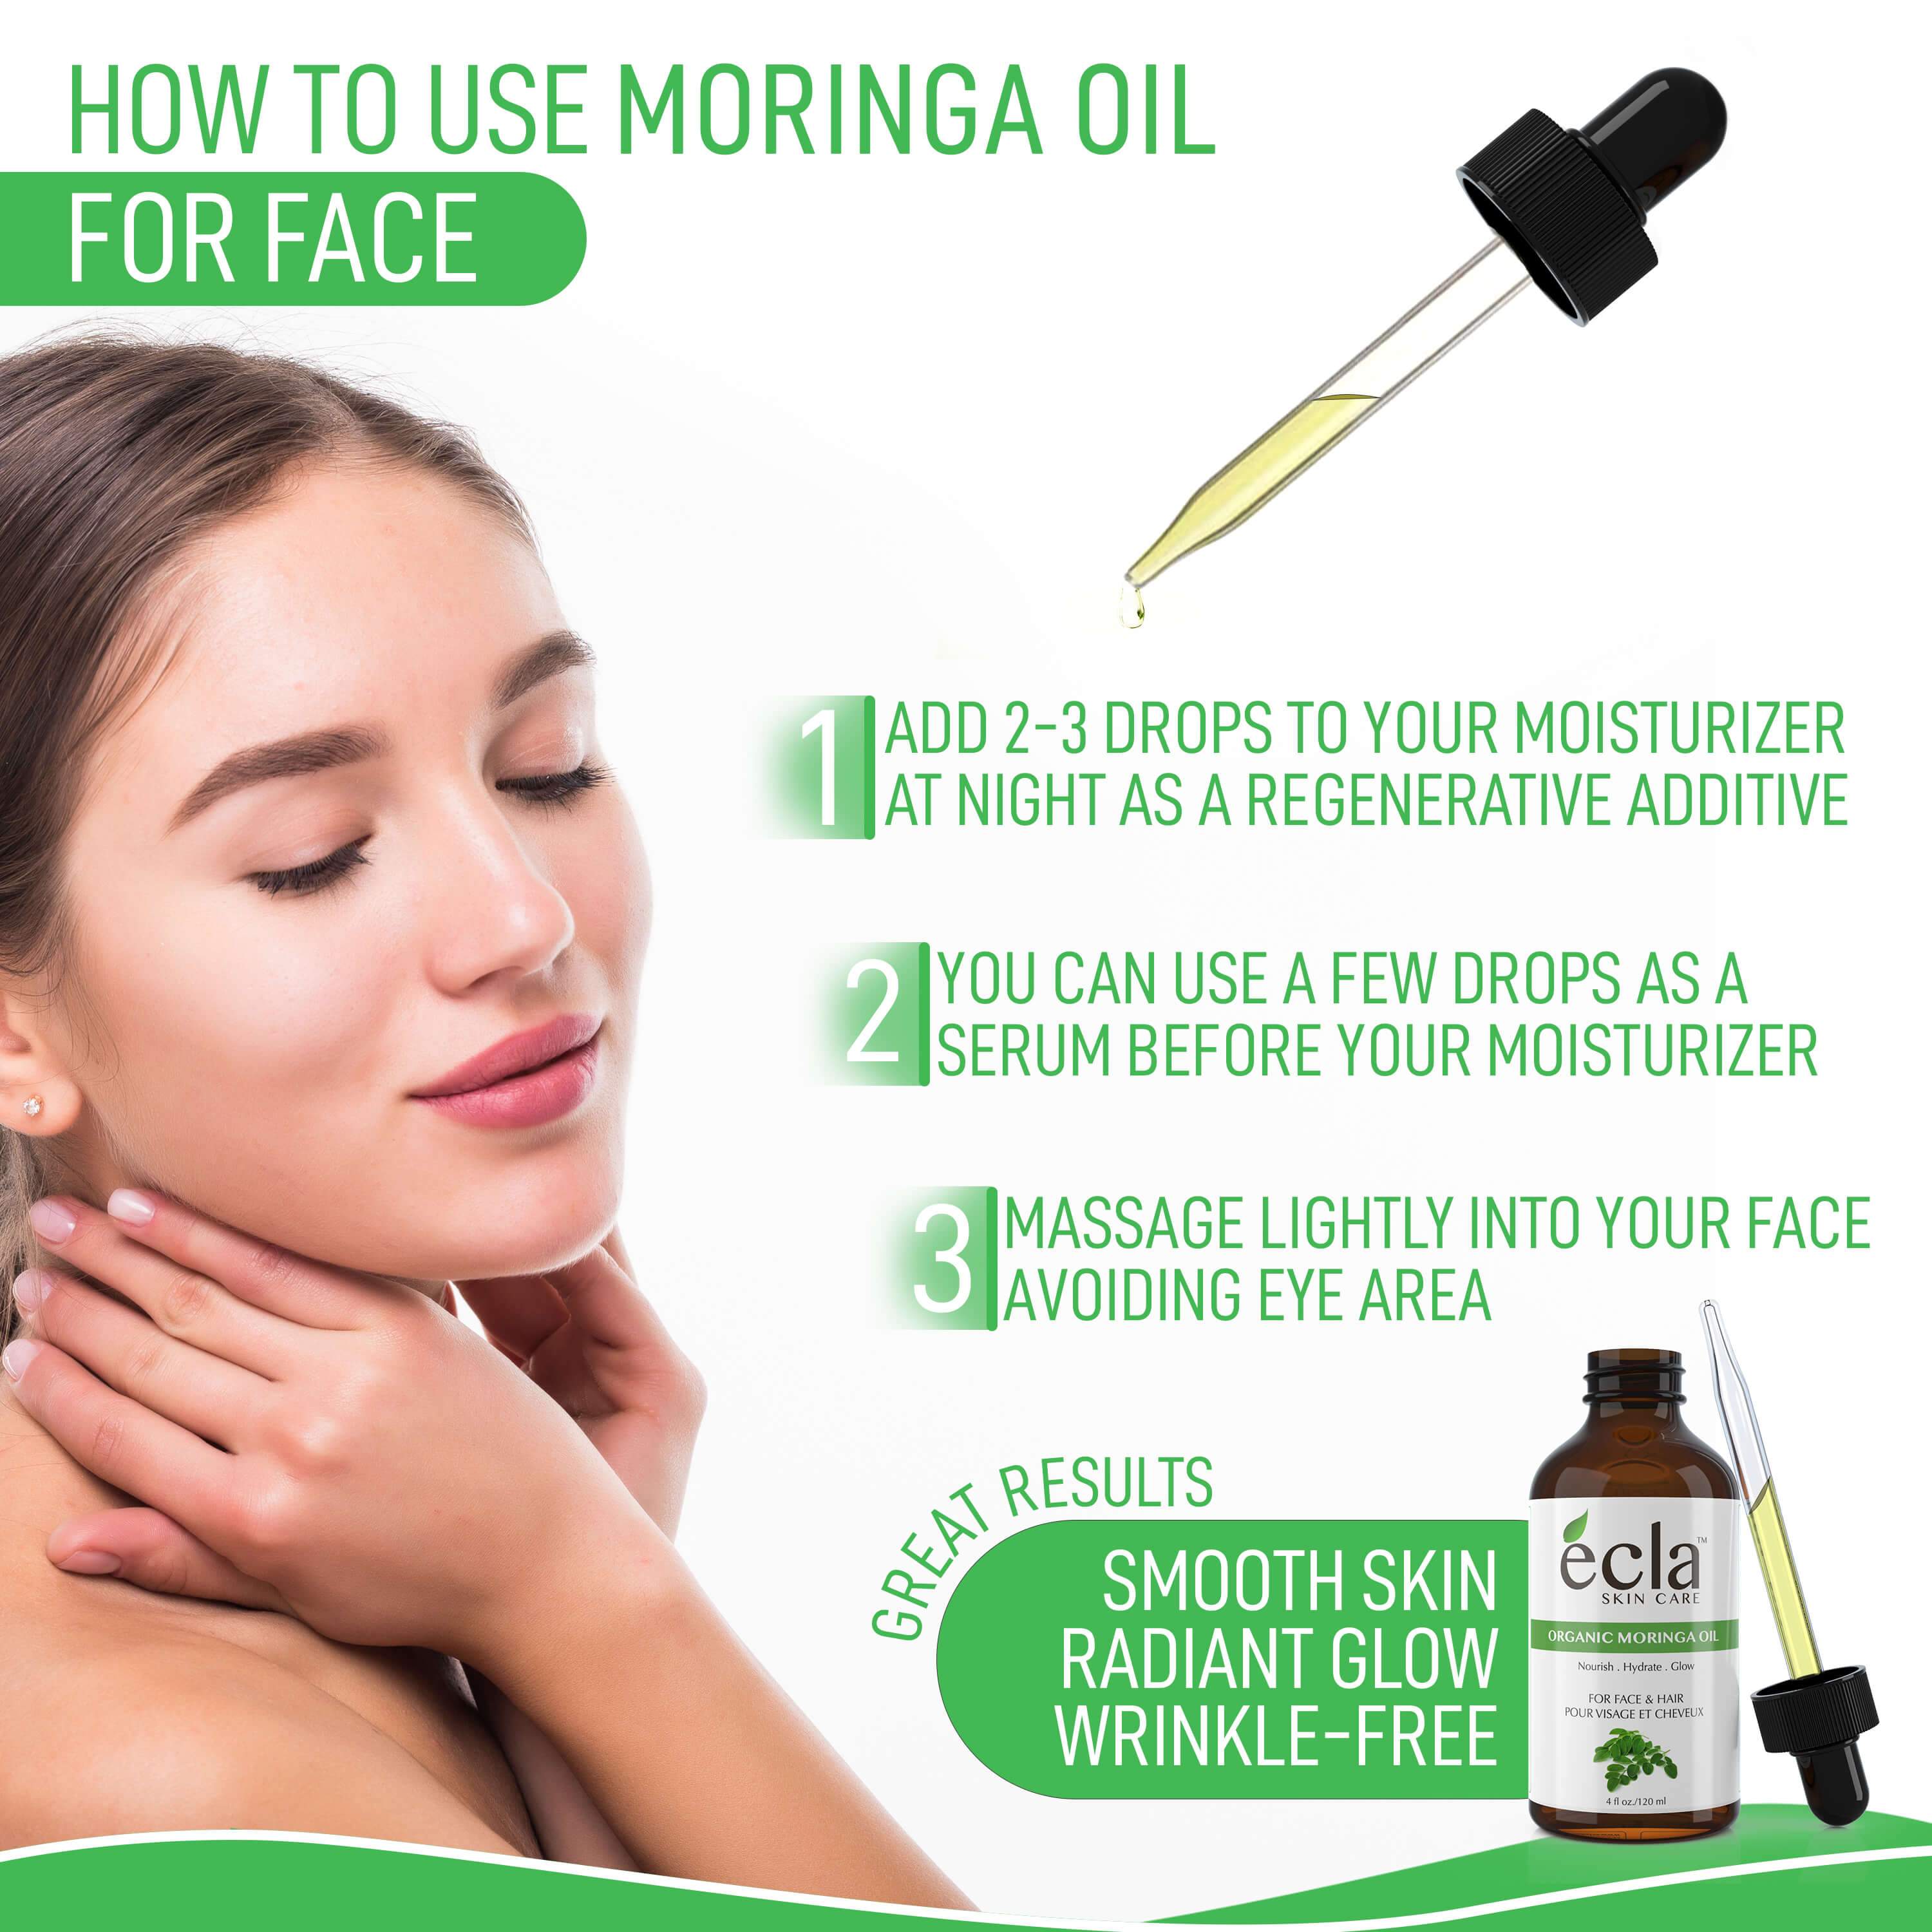 How to use Moringa Oil for face